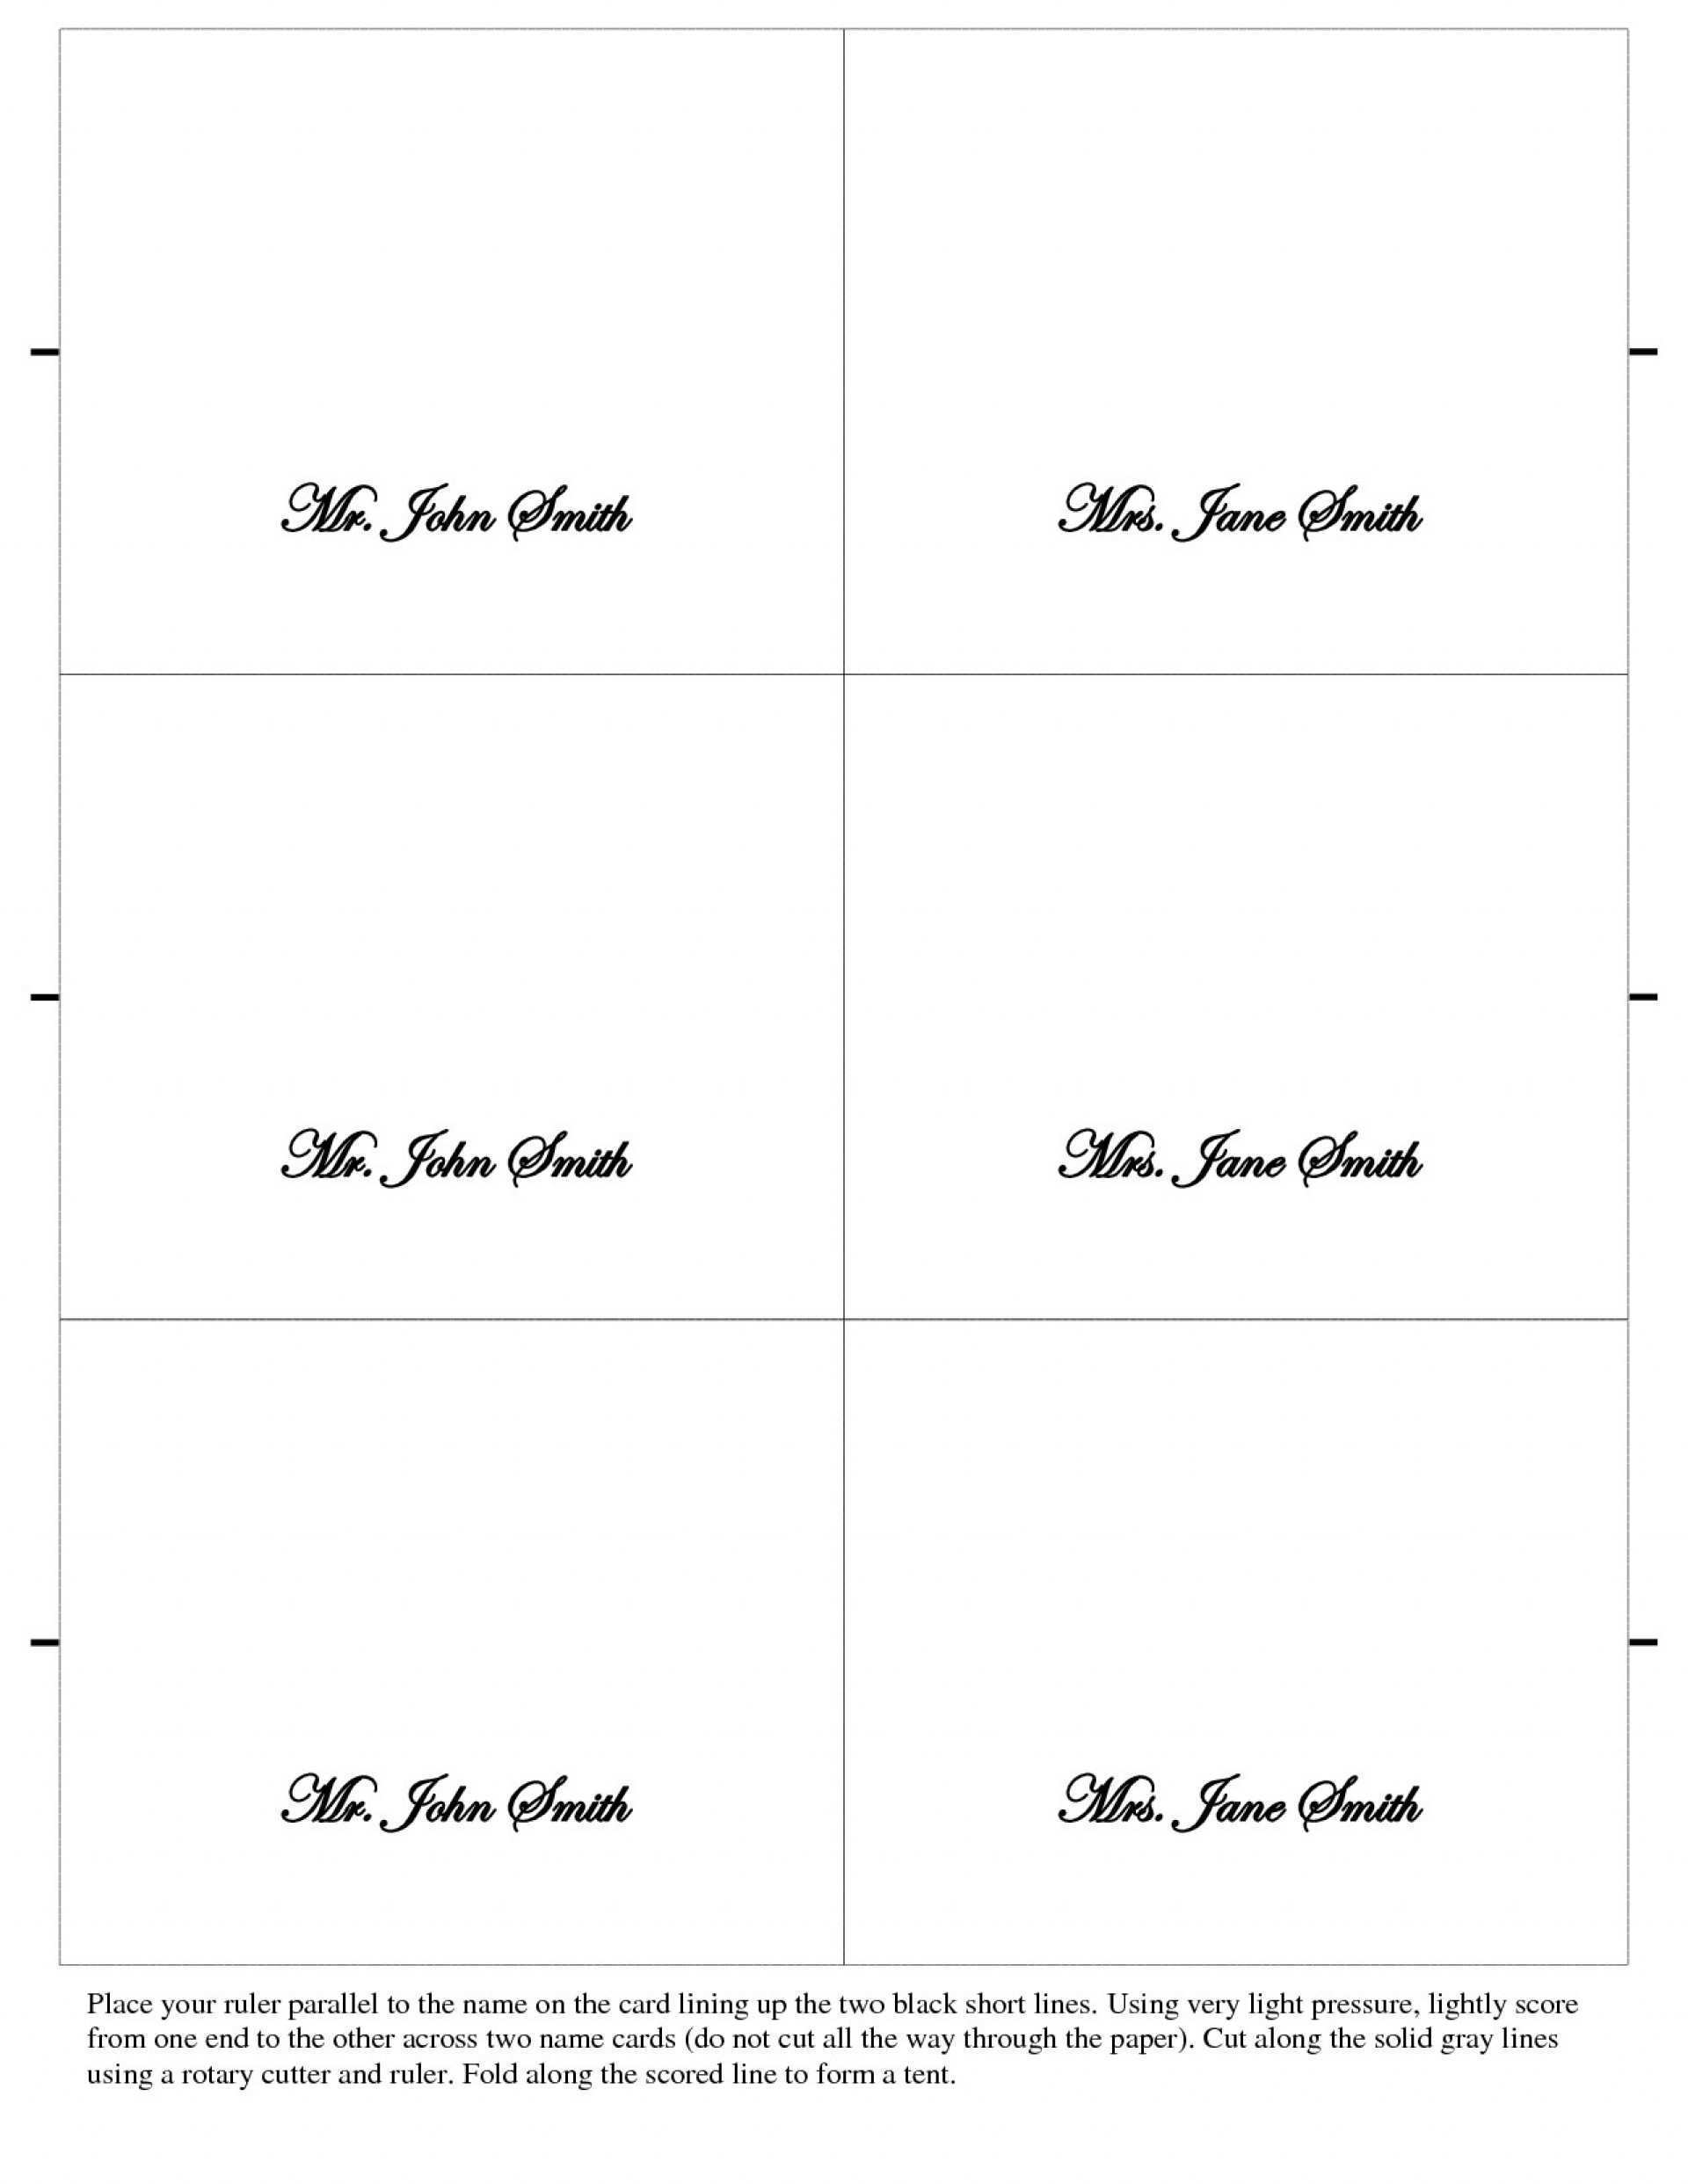 68 How To Create Name Card Template For Meeting by Name Card Template For Meeting